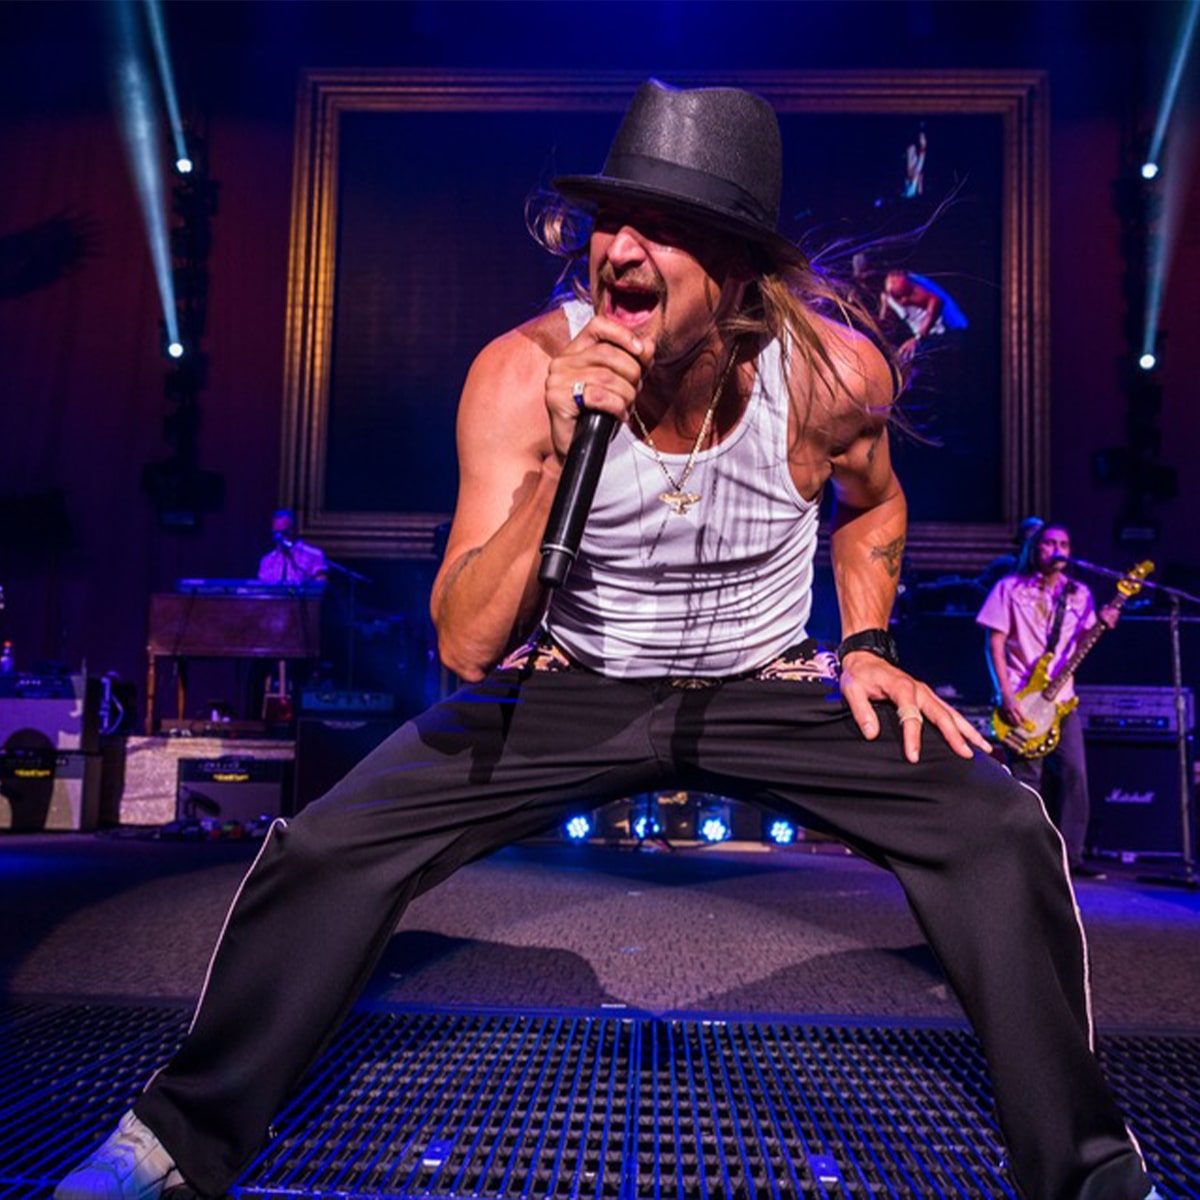 KID ROCK – ROCK THE COUNTRY TOUR